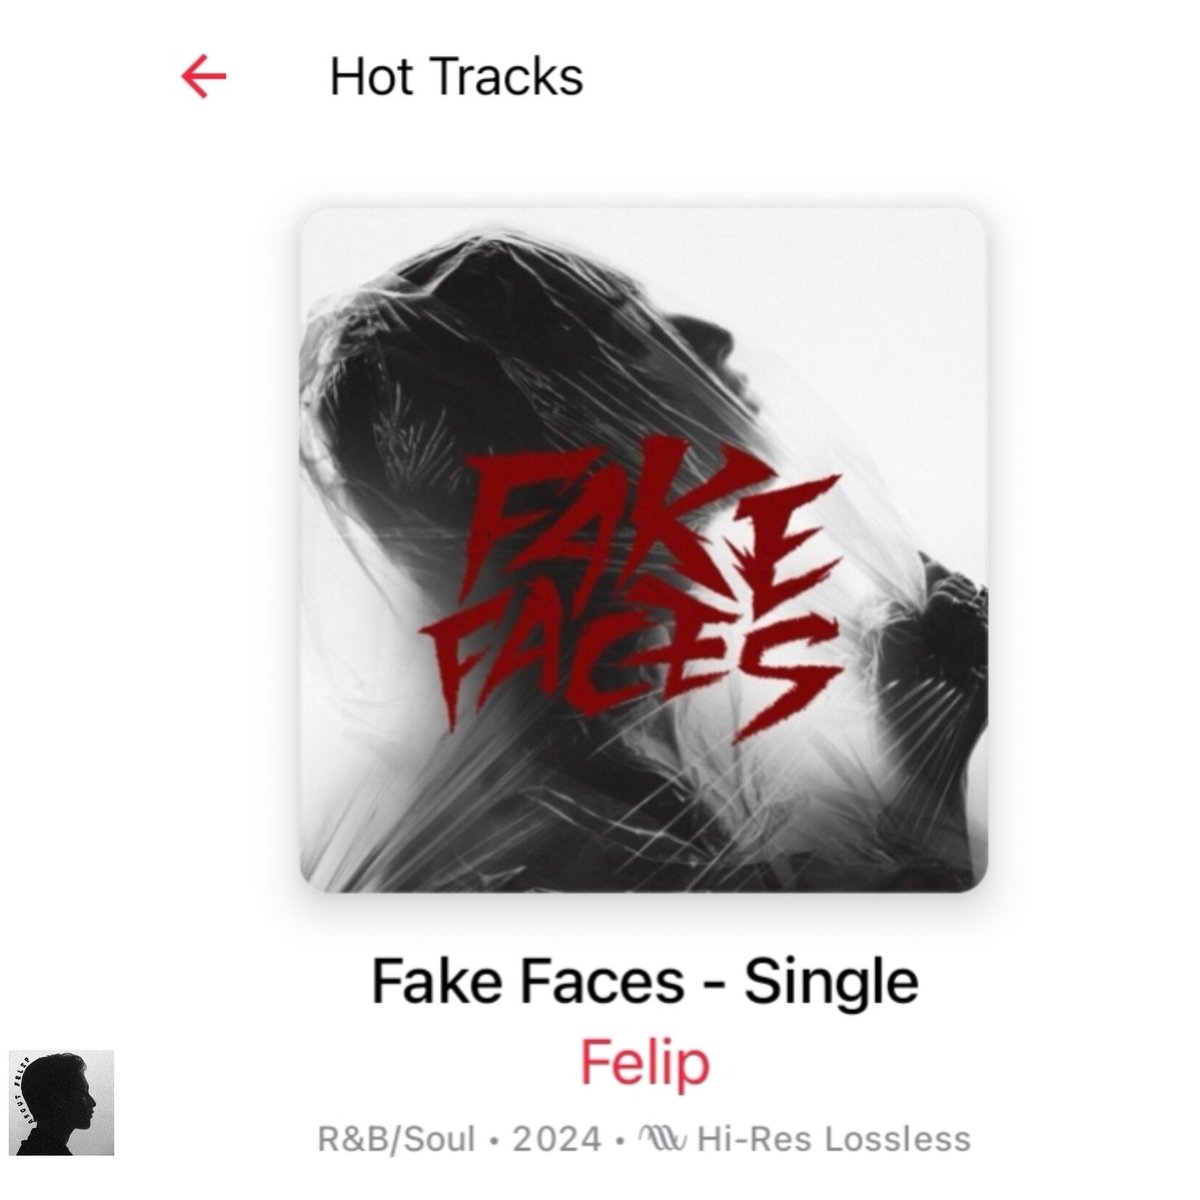 🅢🅣🅡🅔🅐🅜 @felipsuperior #FELIP

📀 TODAY | APRIL.12.2024
#FELIP_Fake_Faces AFTER 1WEEK OF RELEASE:

🔥OFFICIAL MV STILL TRENDING FOR MUSIC AT #12 & REACHED 300K+ PLAYS
🔥LISTED AT APPLE MUSIC-OPM HOT TRACKS 
🔗youtu.be/r8ZKwPdGSNw?si…

•Fake Faces MVShootBTS